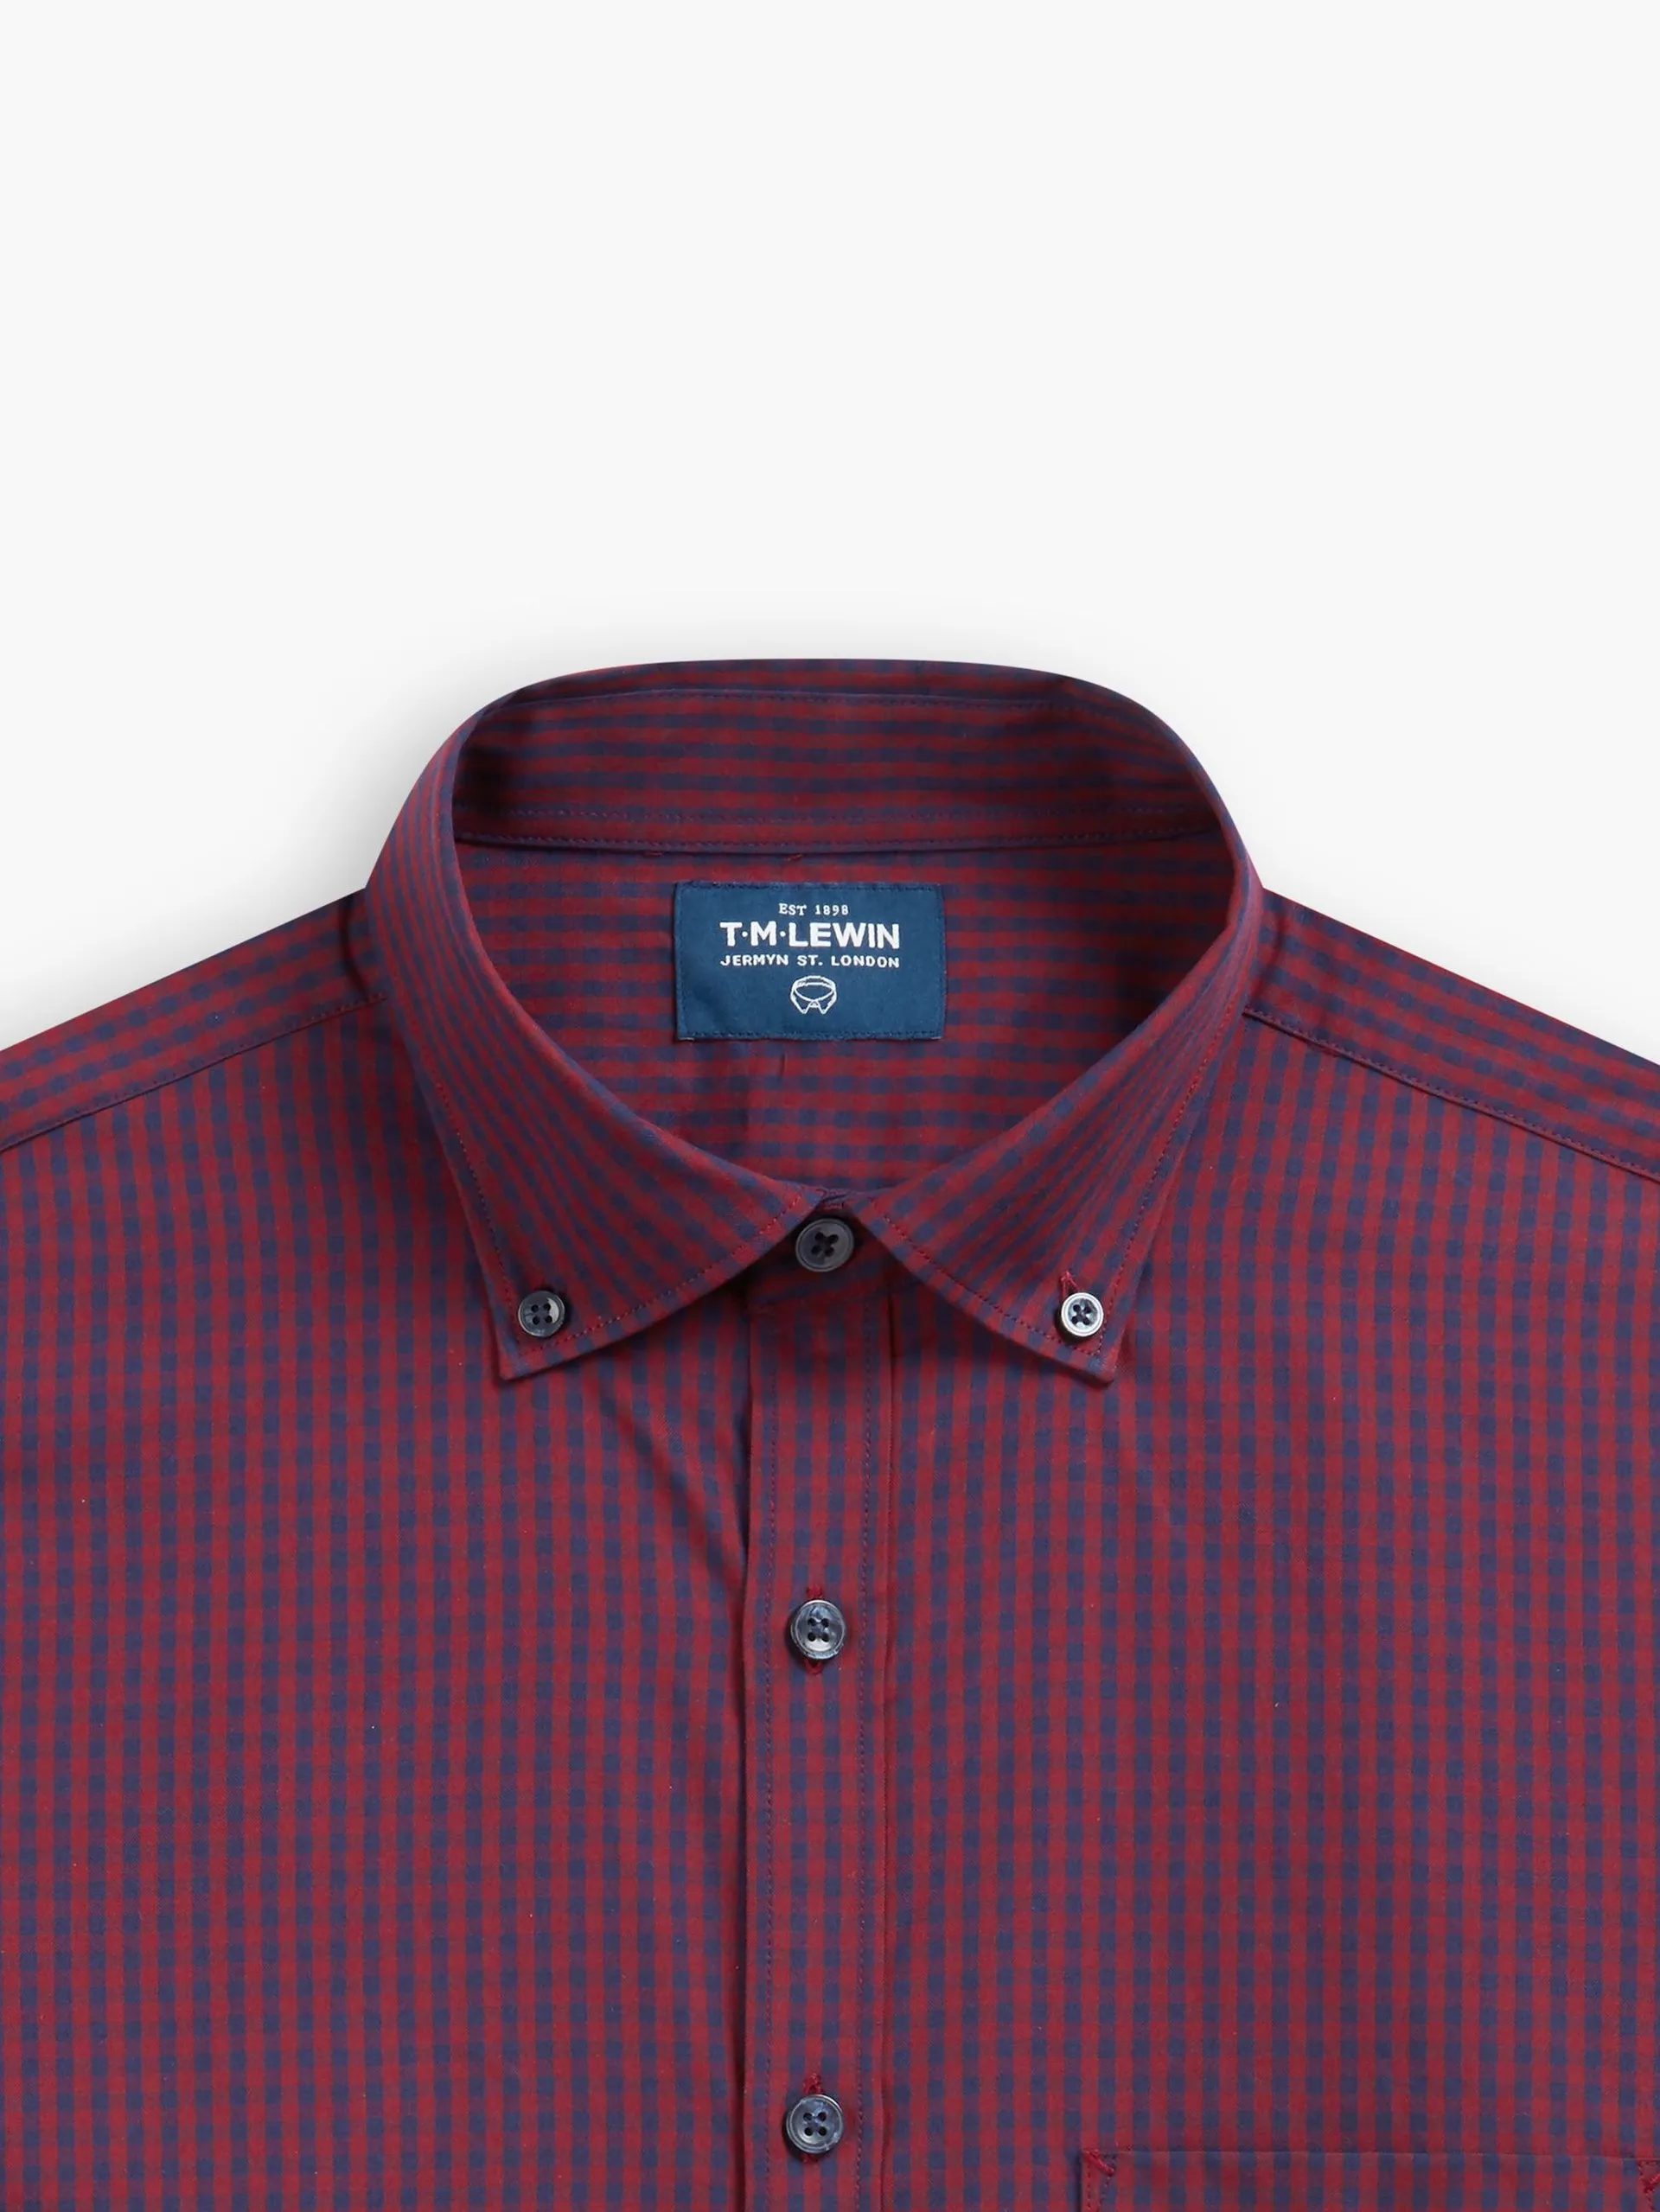 Slim Fit Navy & Red Gingham Oxford Weave Shirt